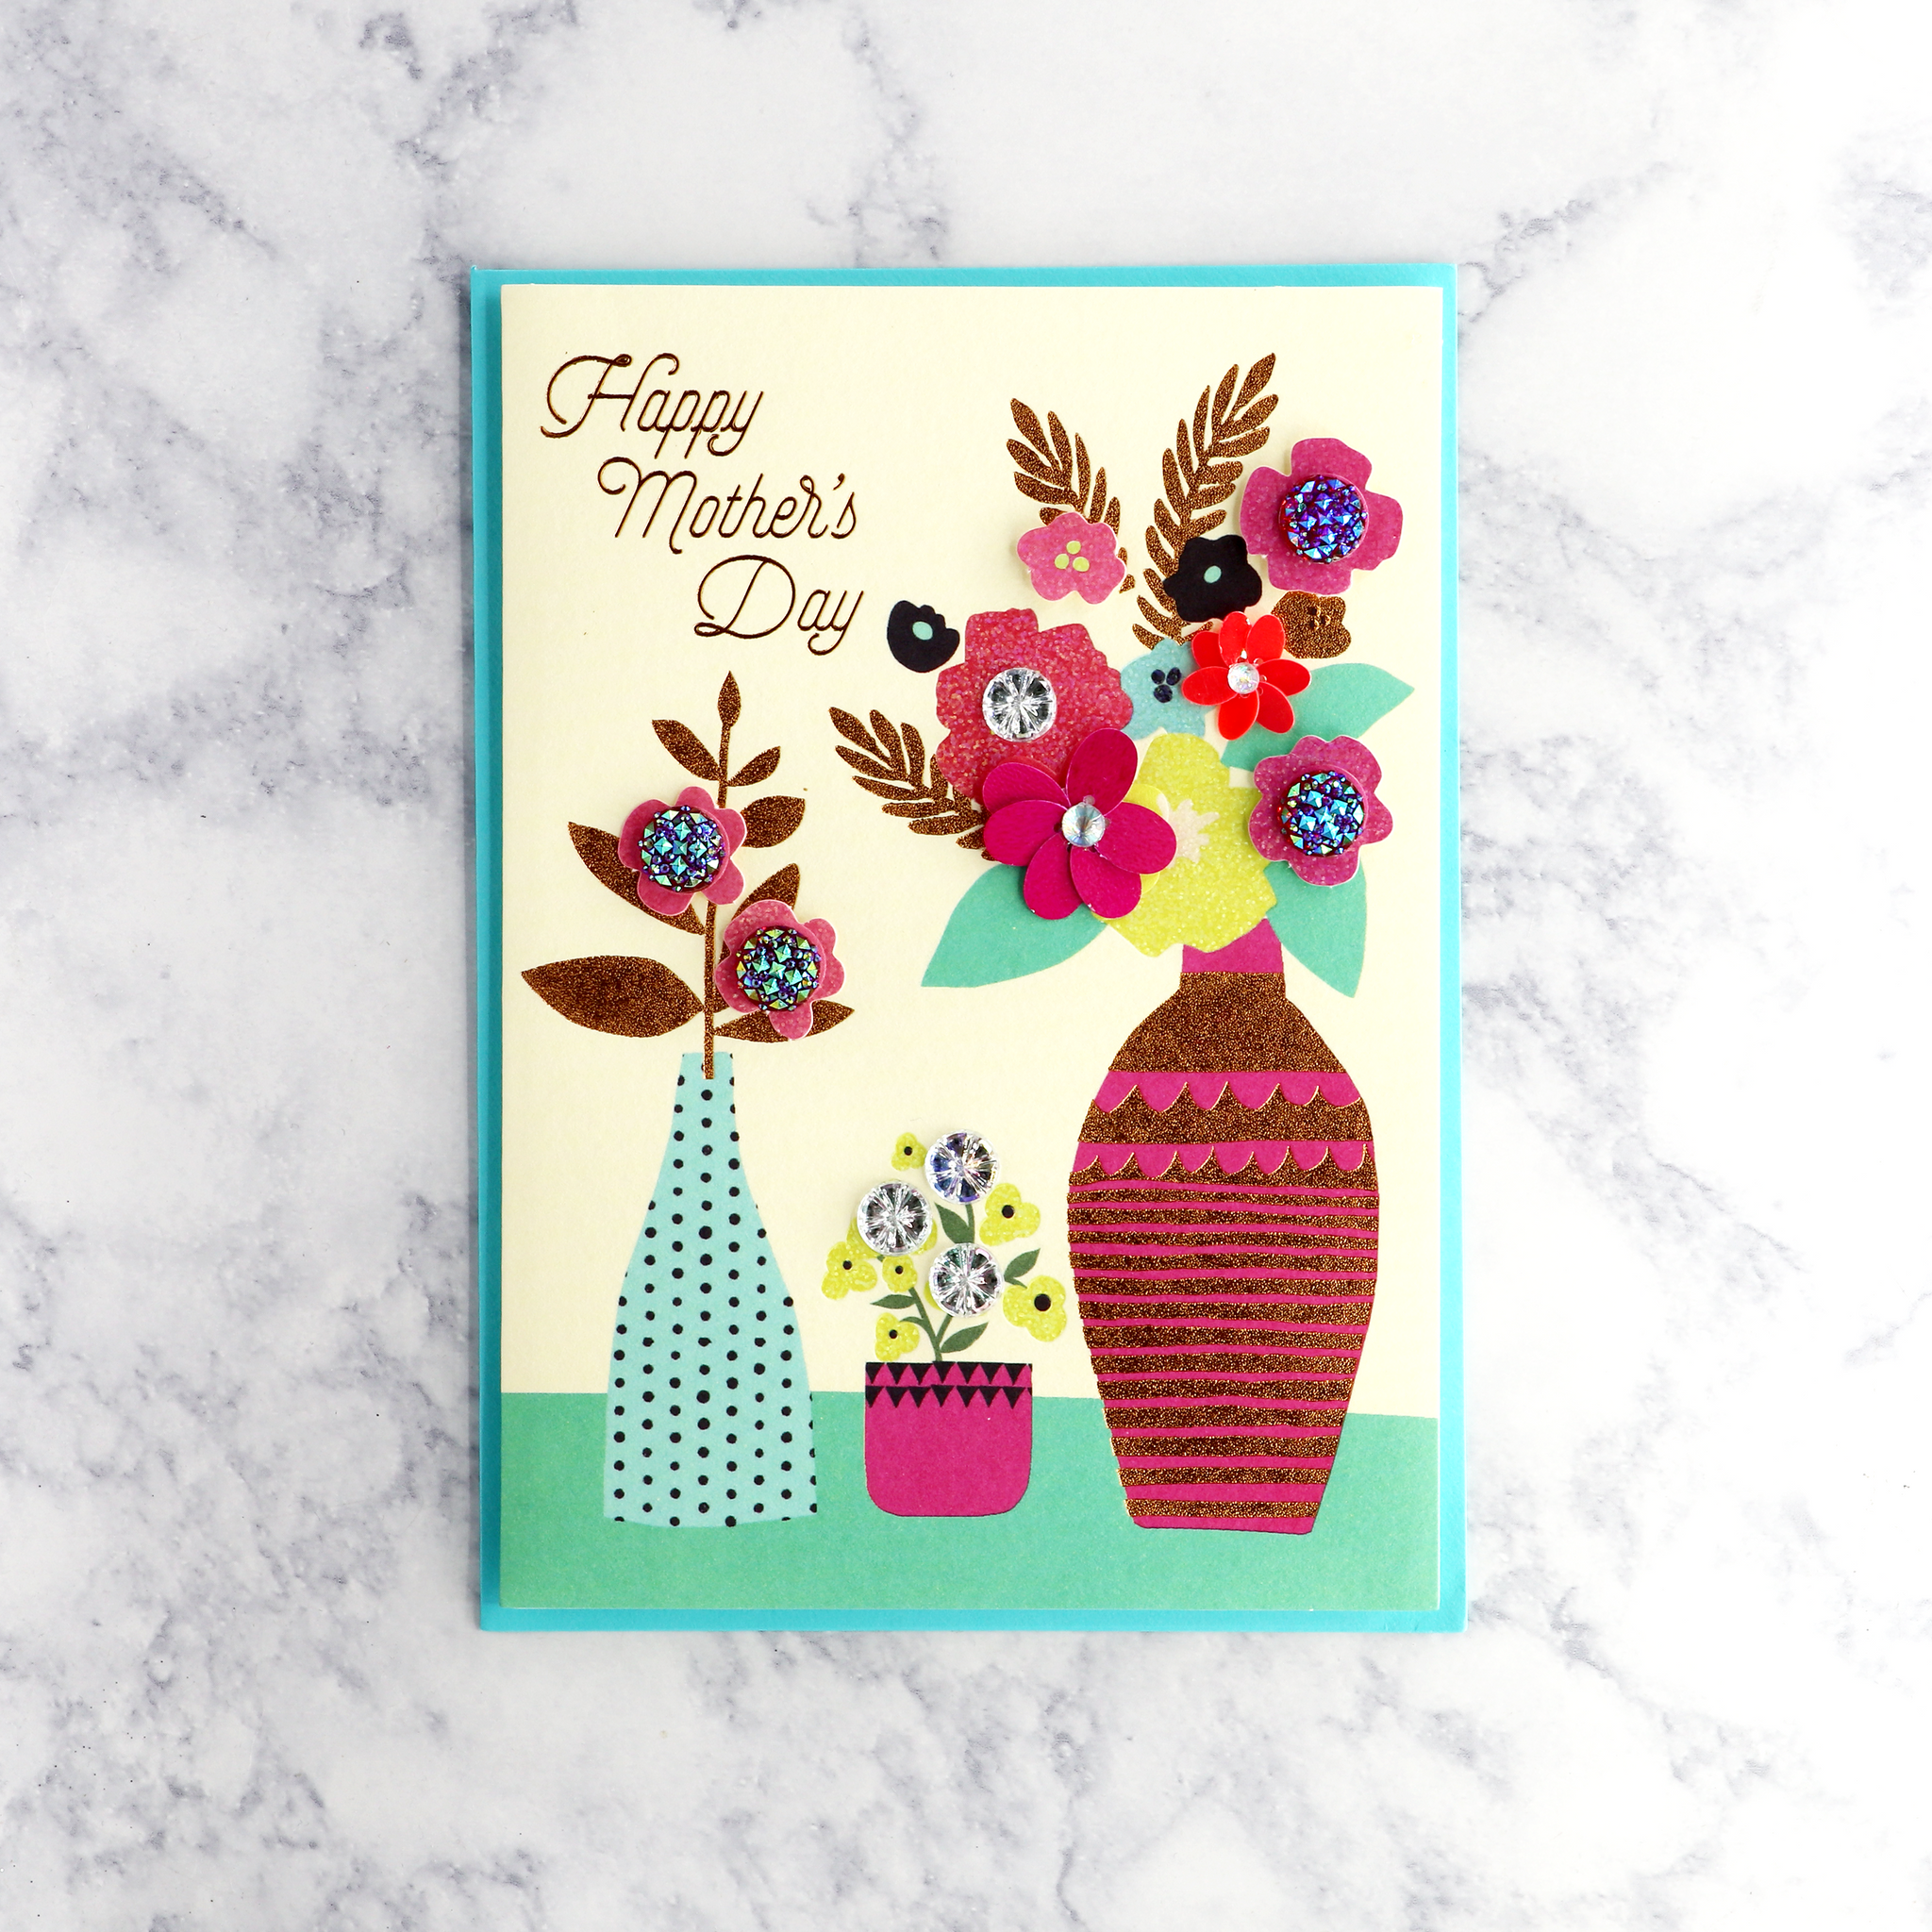 Patterned Vases Mother's Day Card